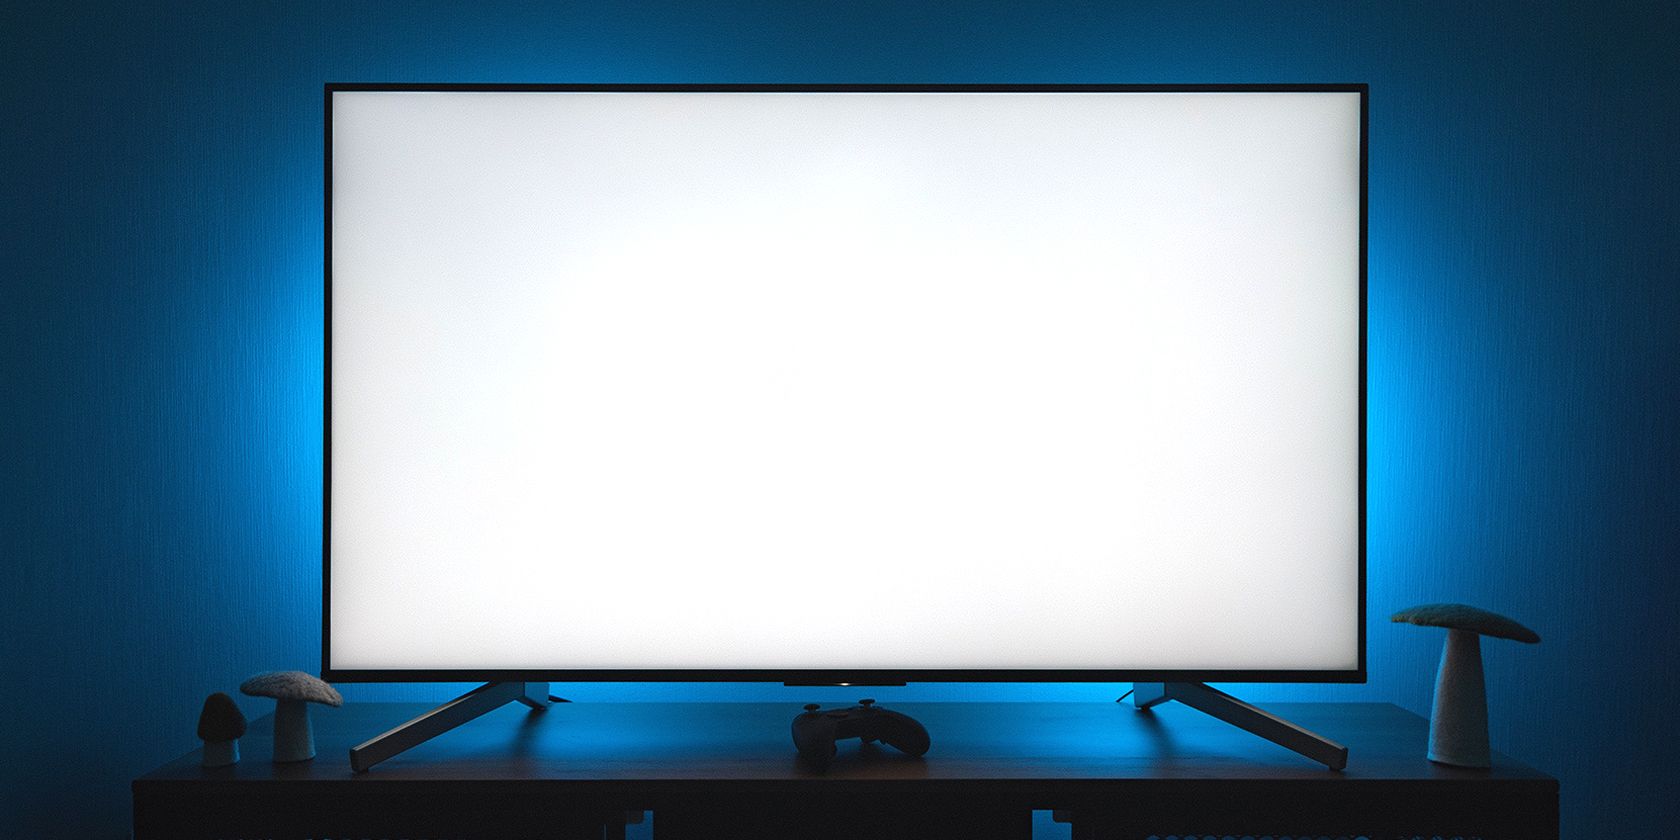 A home theater projection screen.